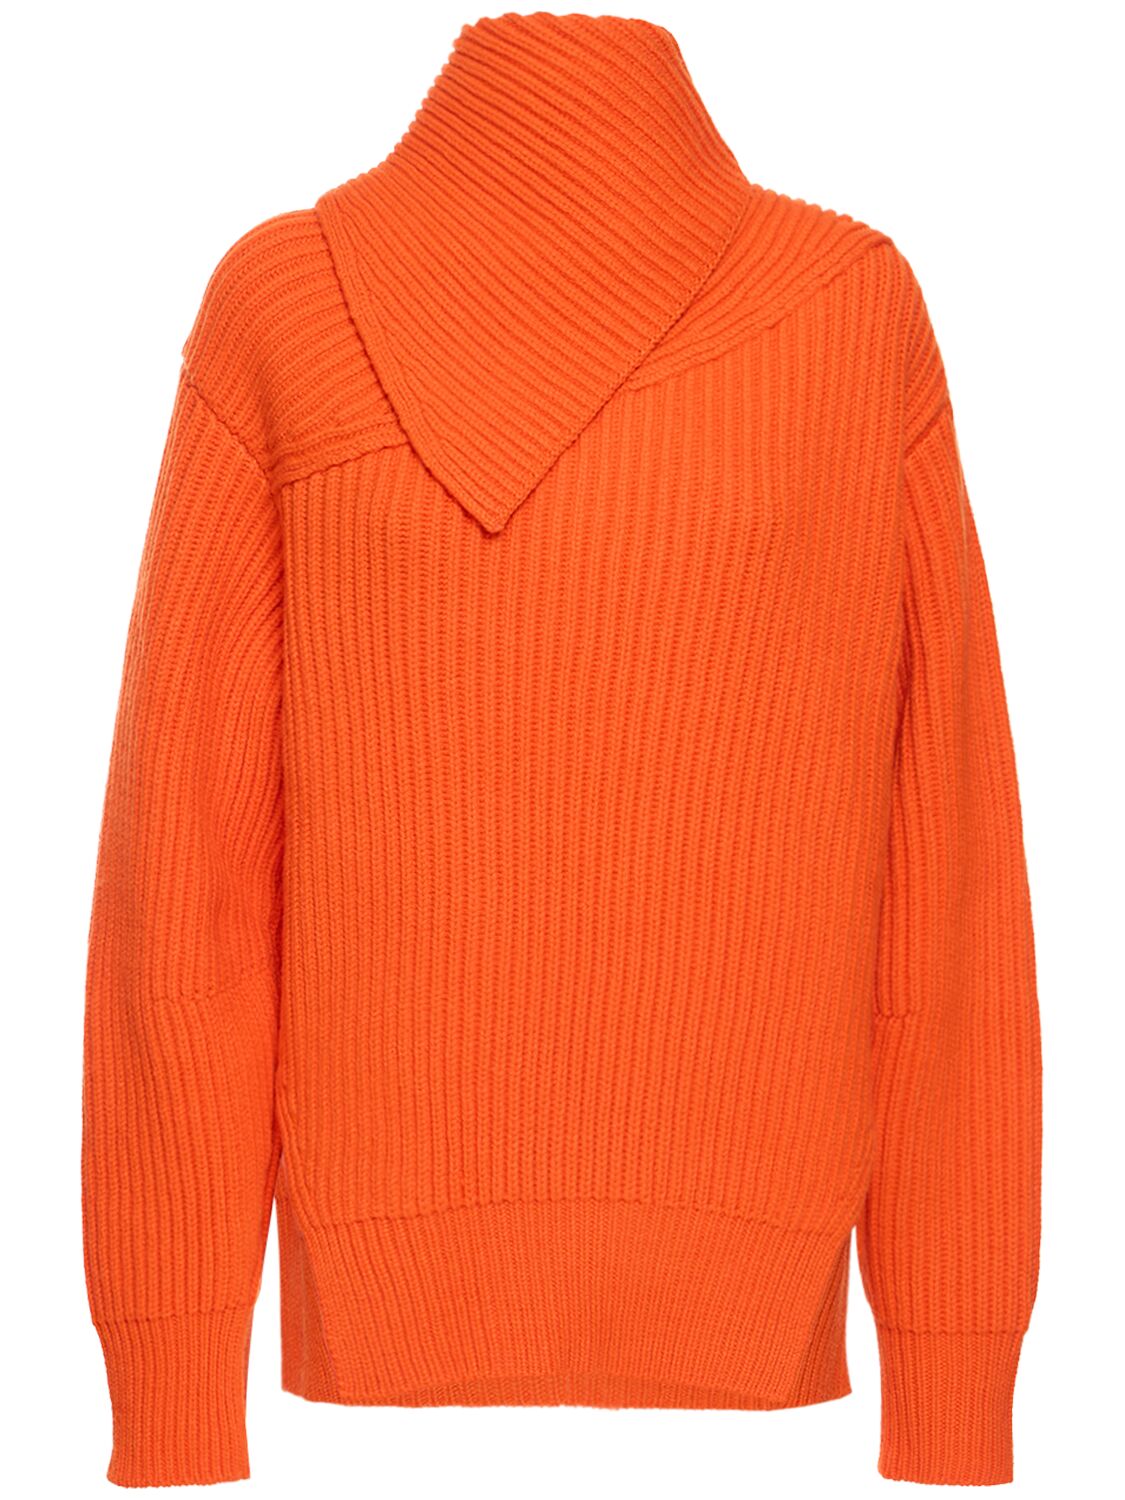 Image of Superfine Knit Wool Sweater